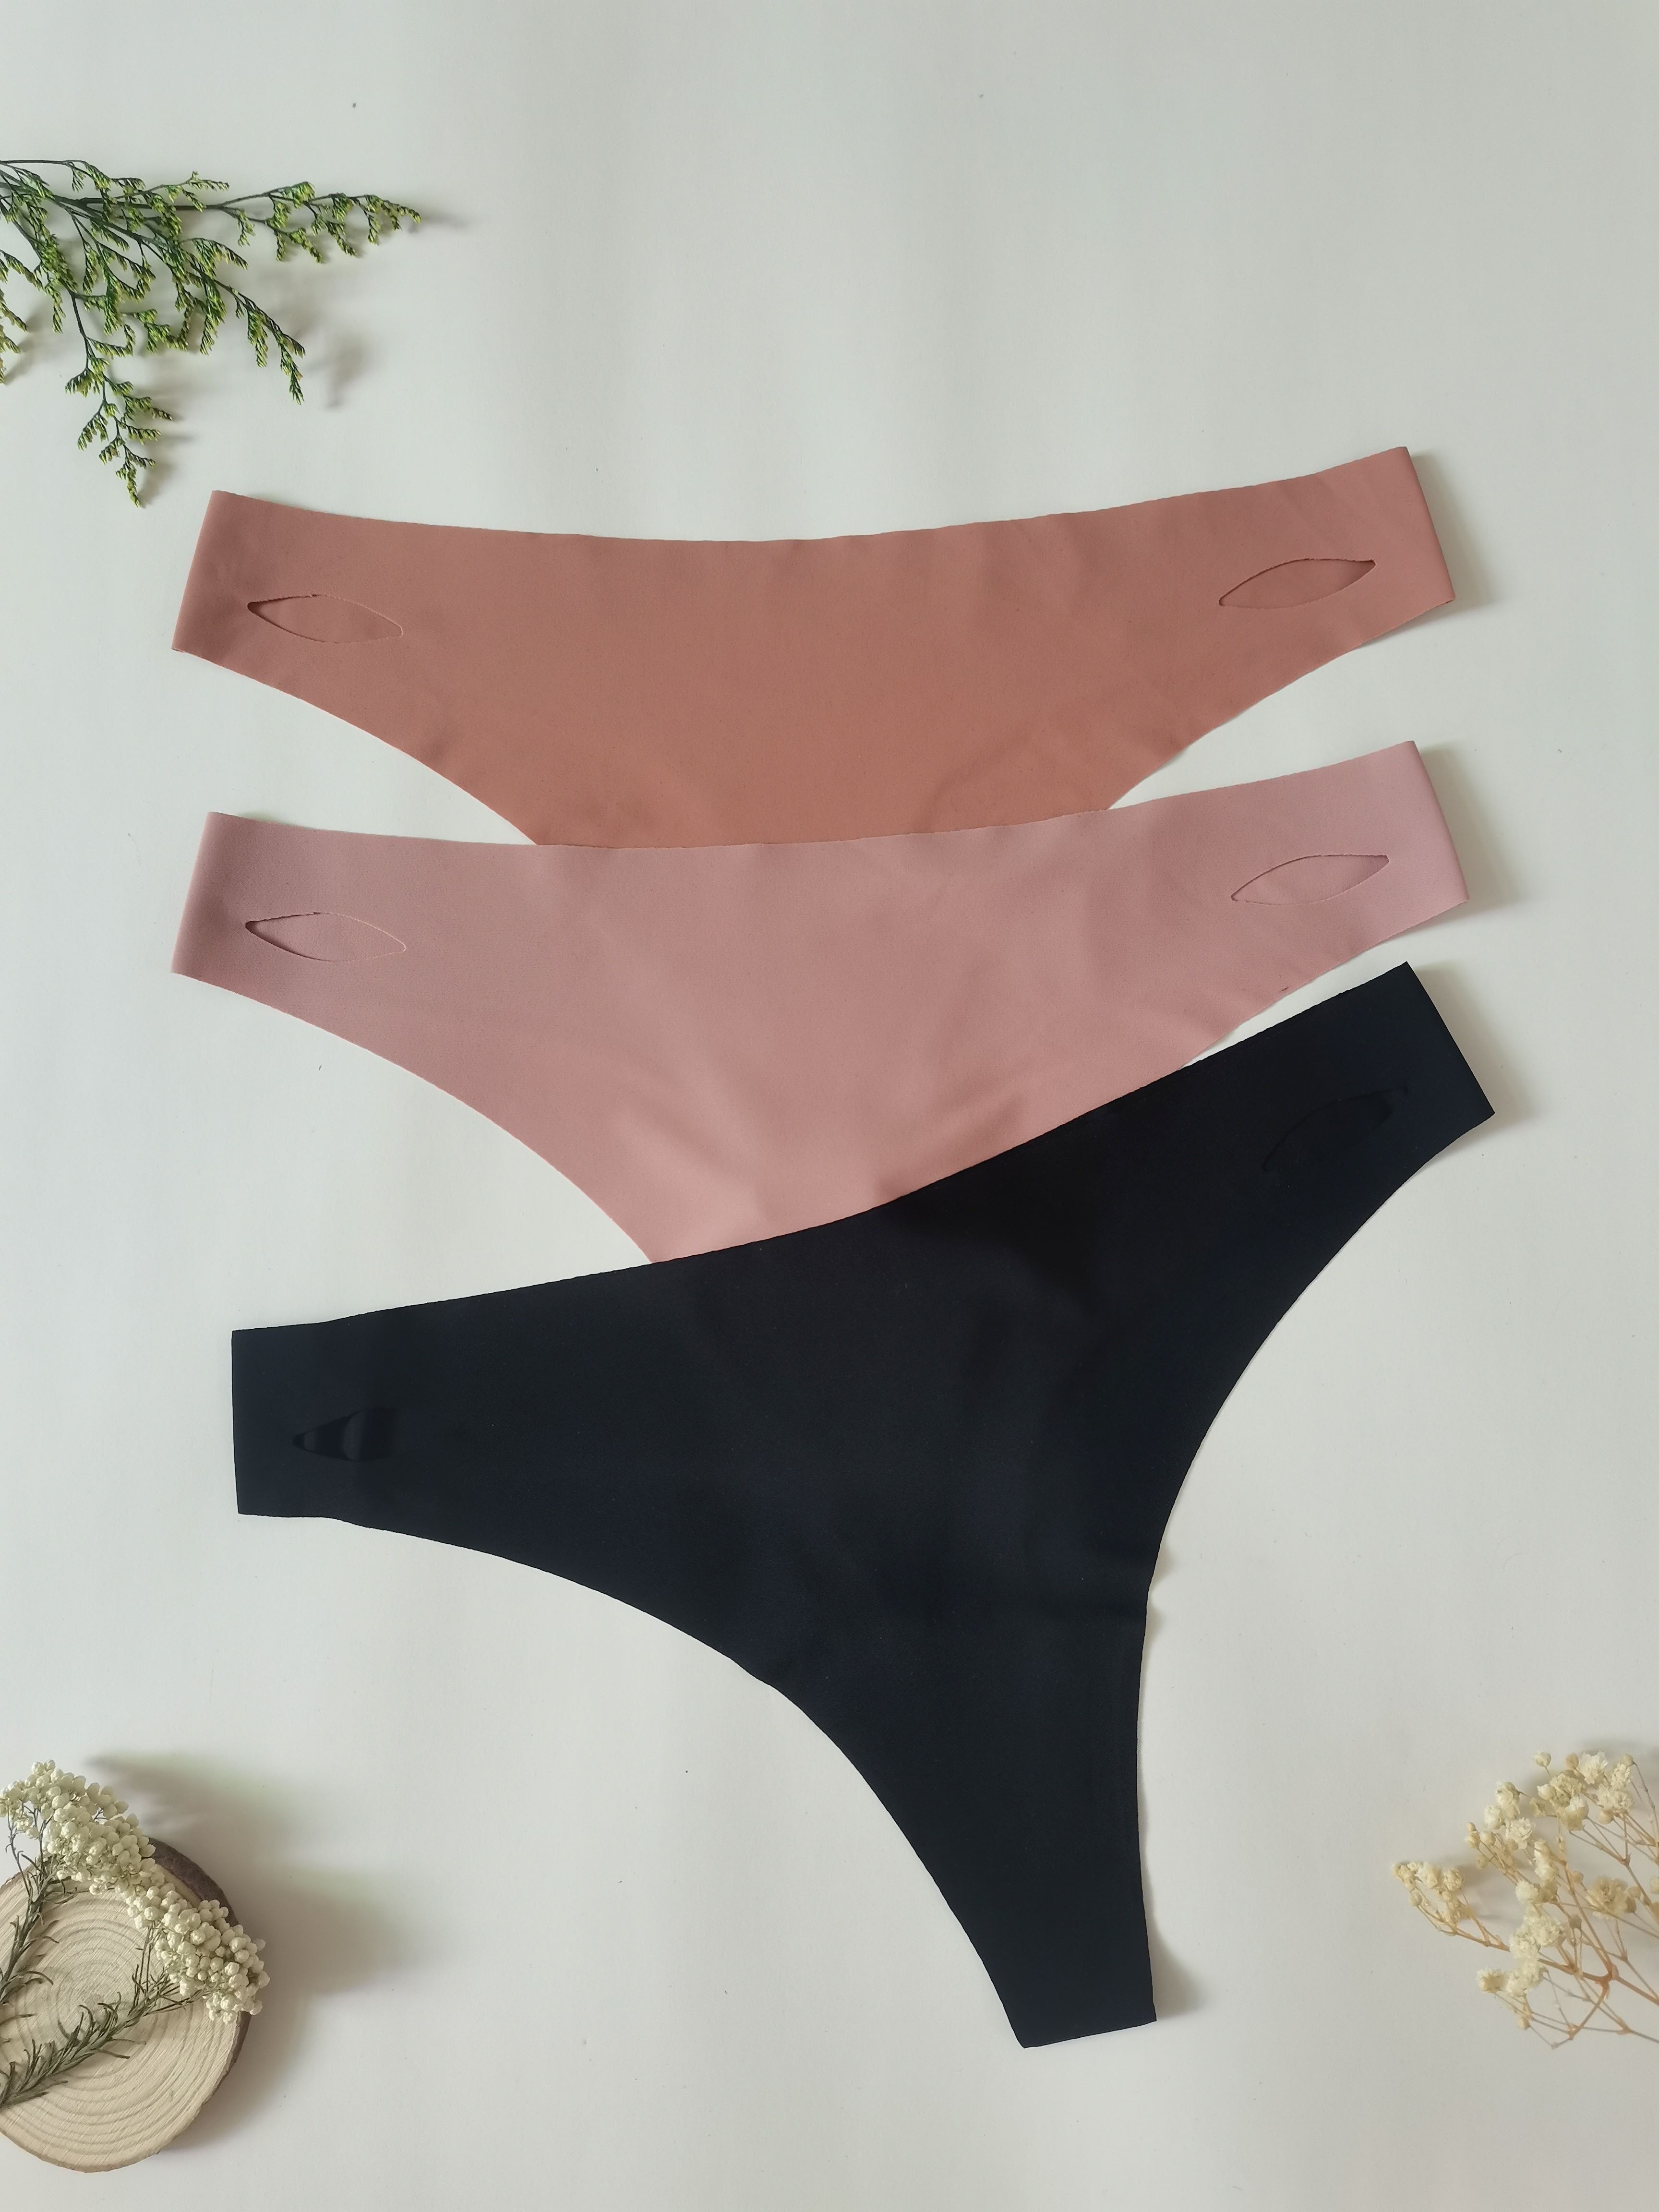 3pcs Seamless Cut Out Thongs, Breathable & Comfy Intimates Panties, Women's  Lingerie & Underwear